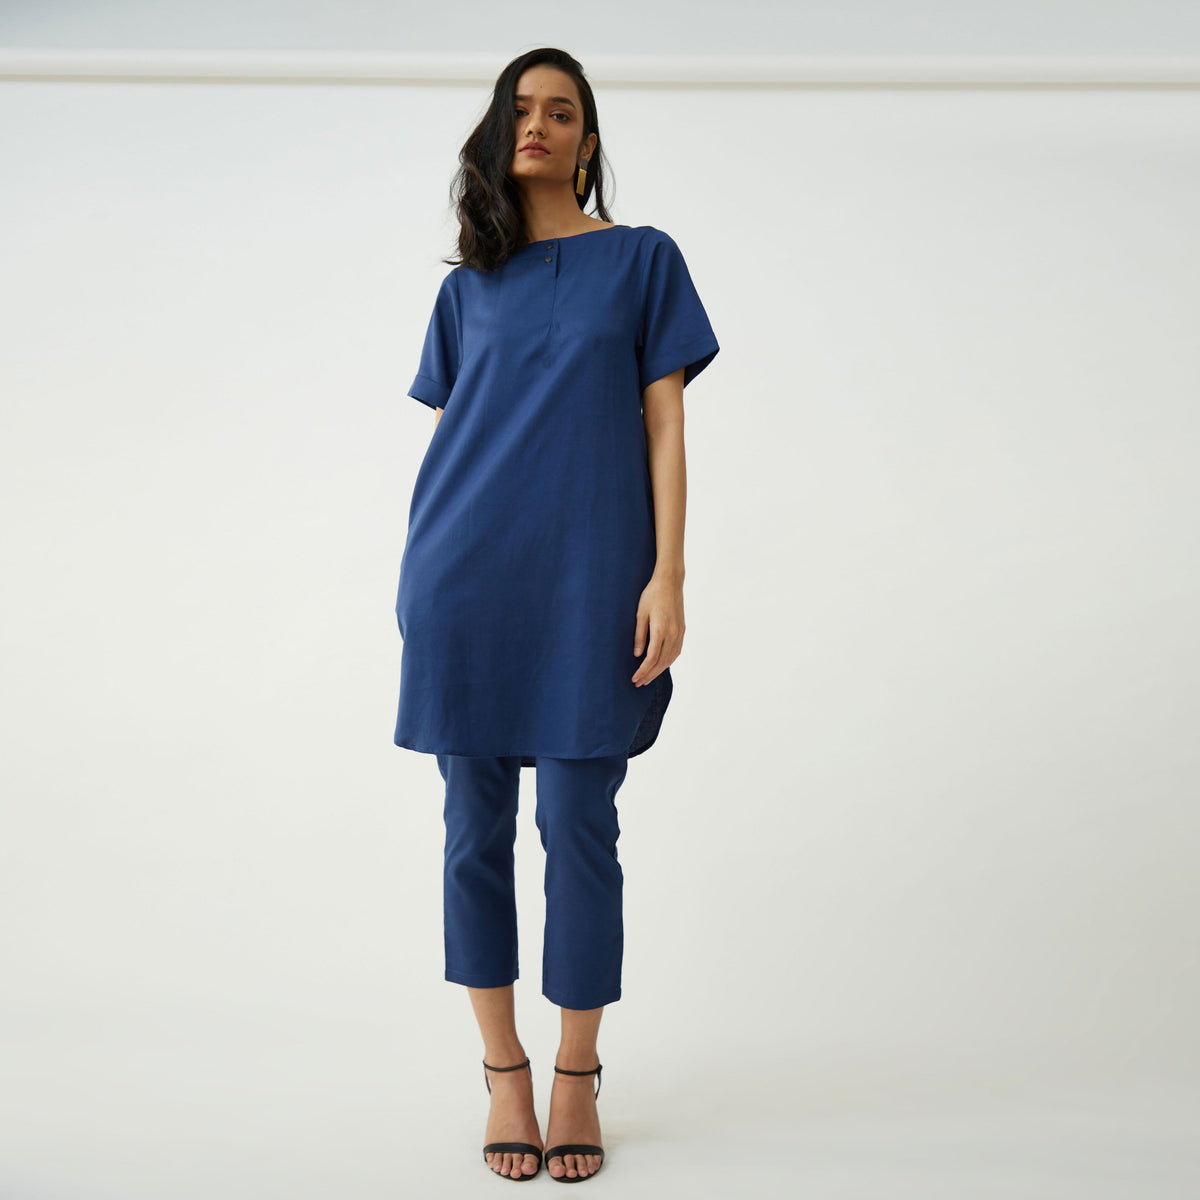 Saltpetre womens wear, indo-western pants and long tunic for semi formal, casual, occassional wear. Comfortably pencil-shaped ankle-length leg pants in indigo blue colour. Ankle length, back elastic and side pockets.